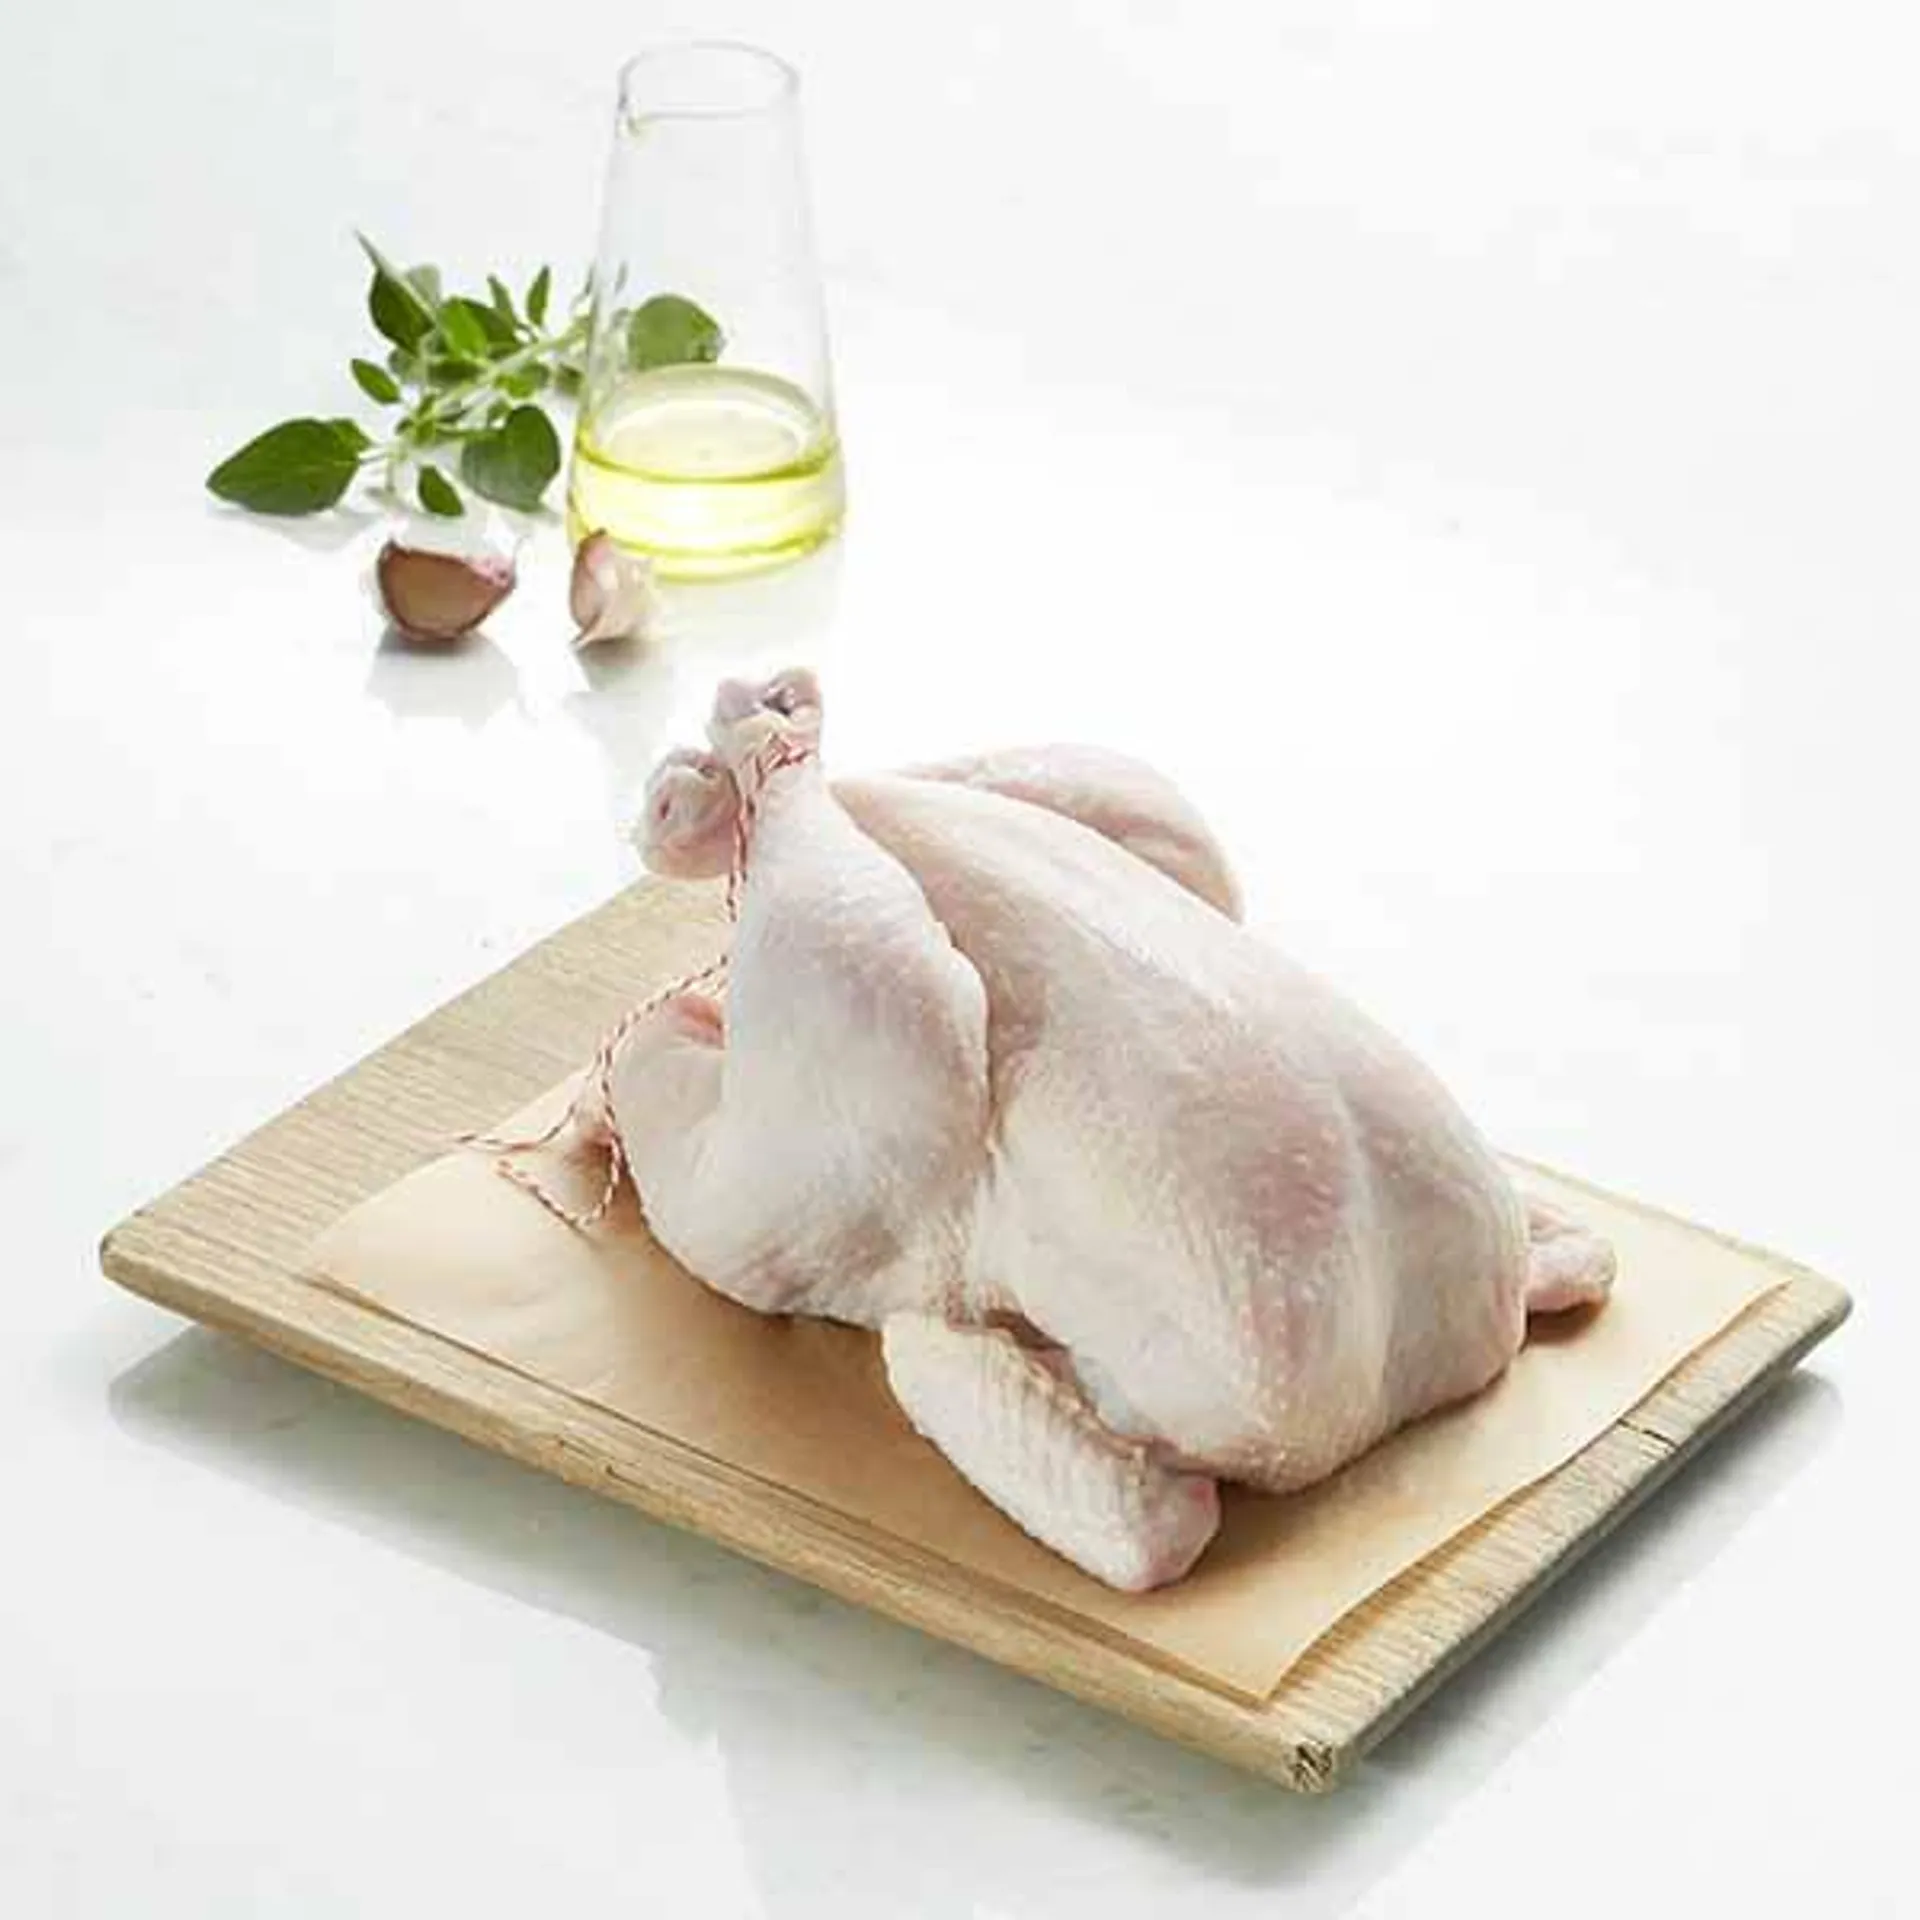 Chicken Whole Size 17 – Each